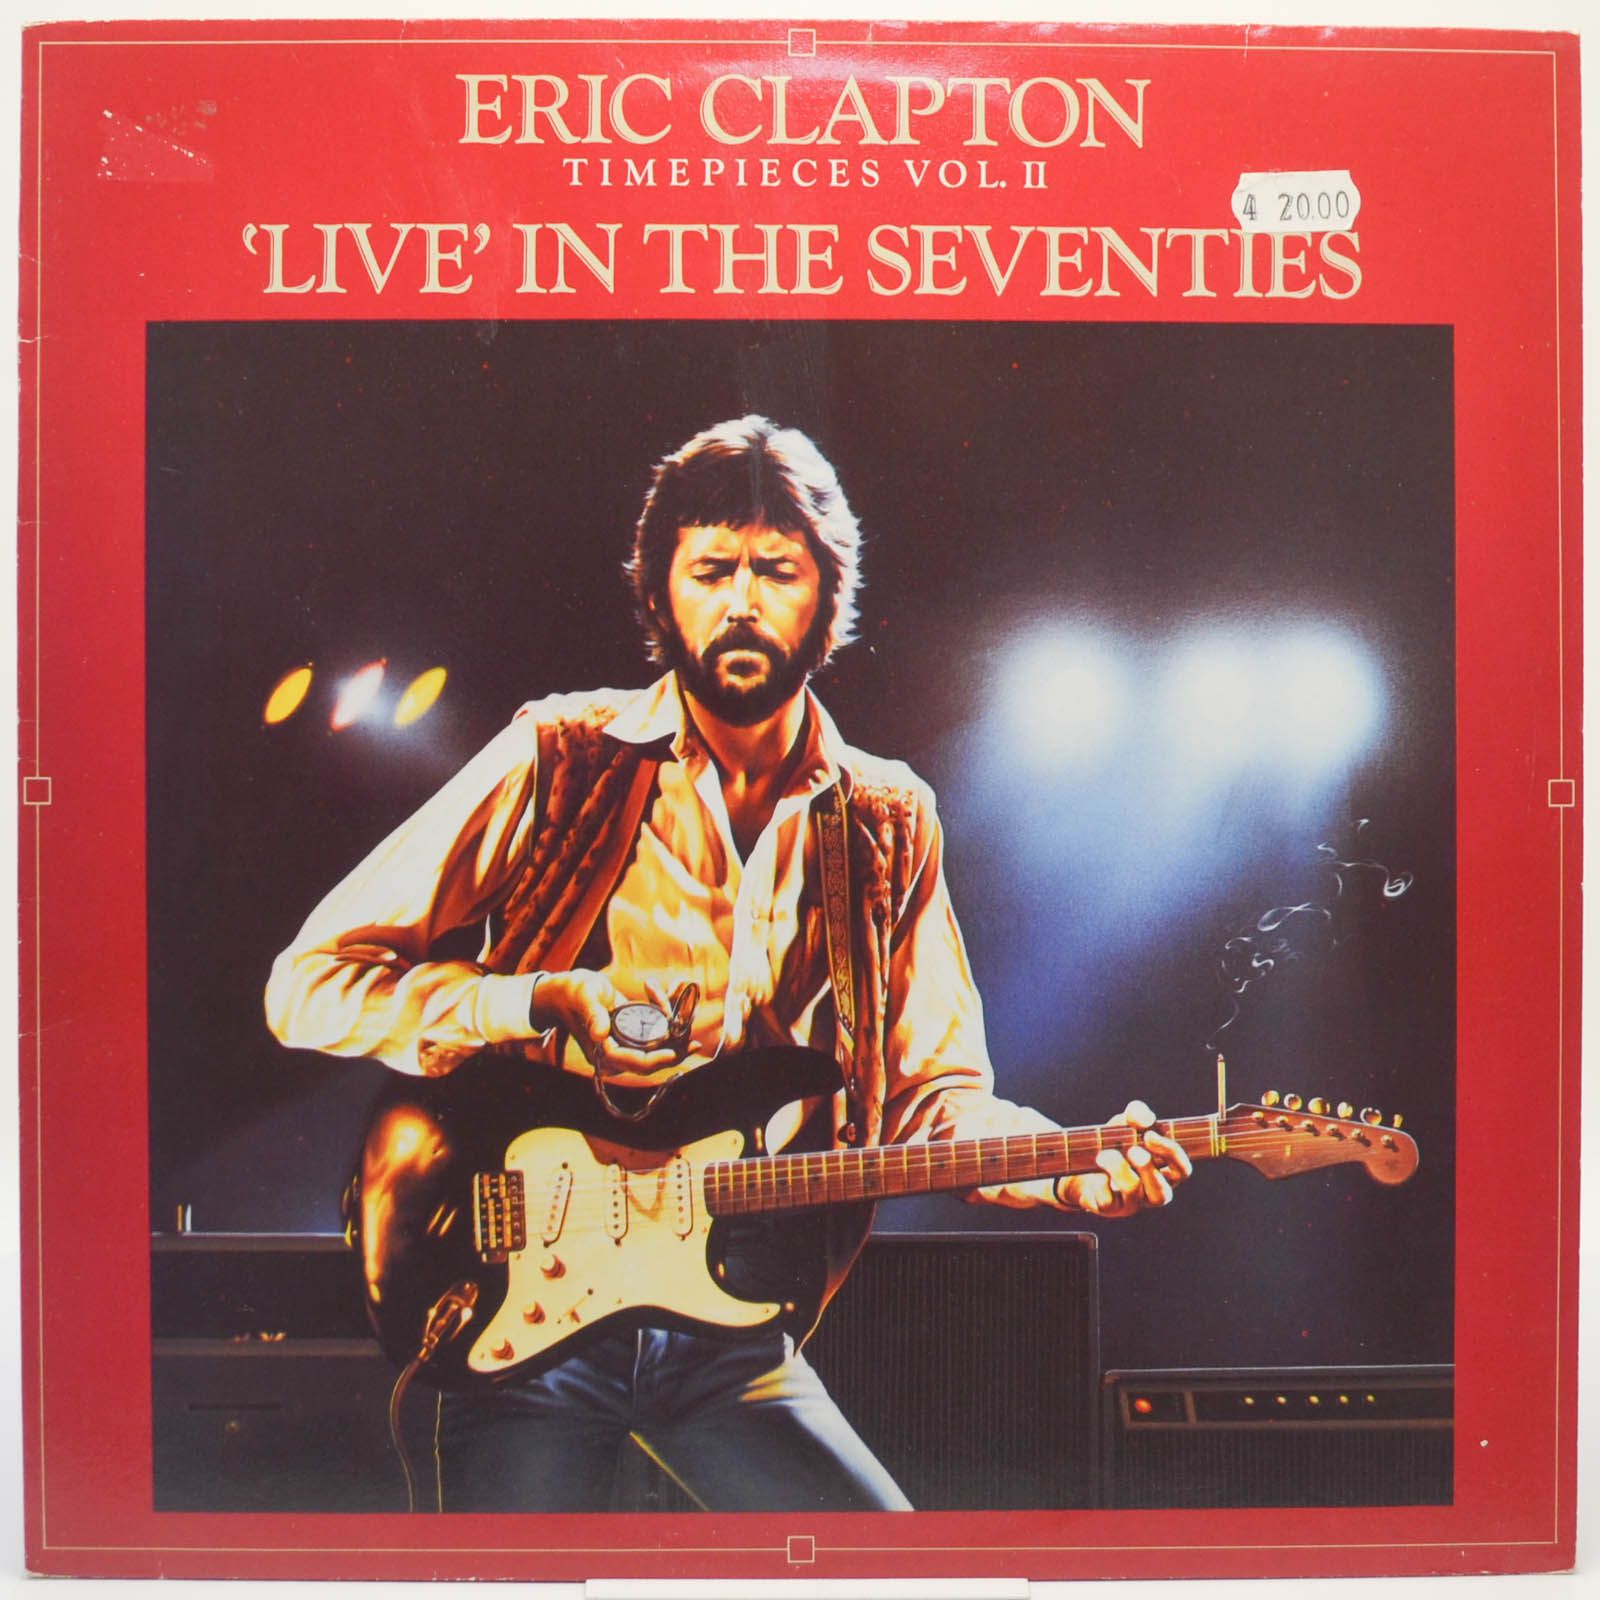 Eric Clapton — Timepieces Vol. II - 'Live' In The Seventies, 1983